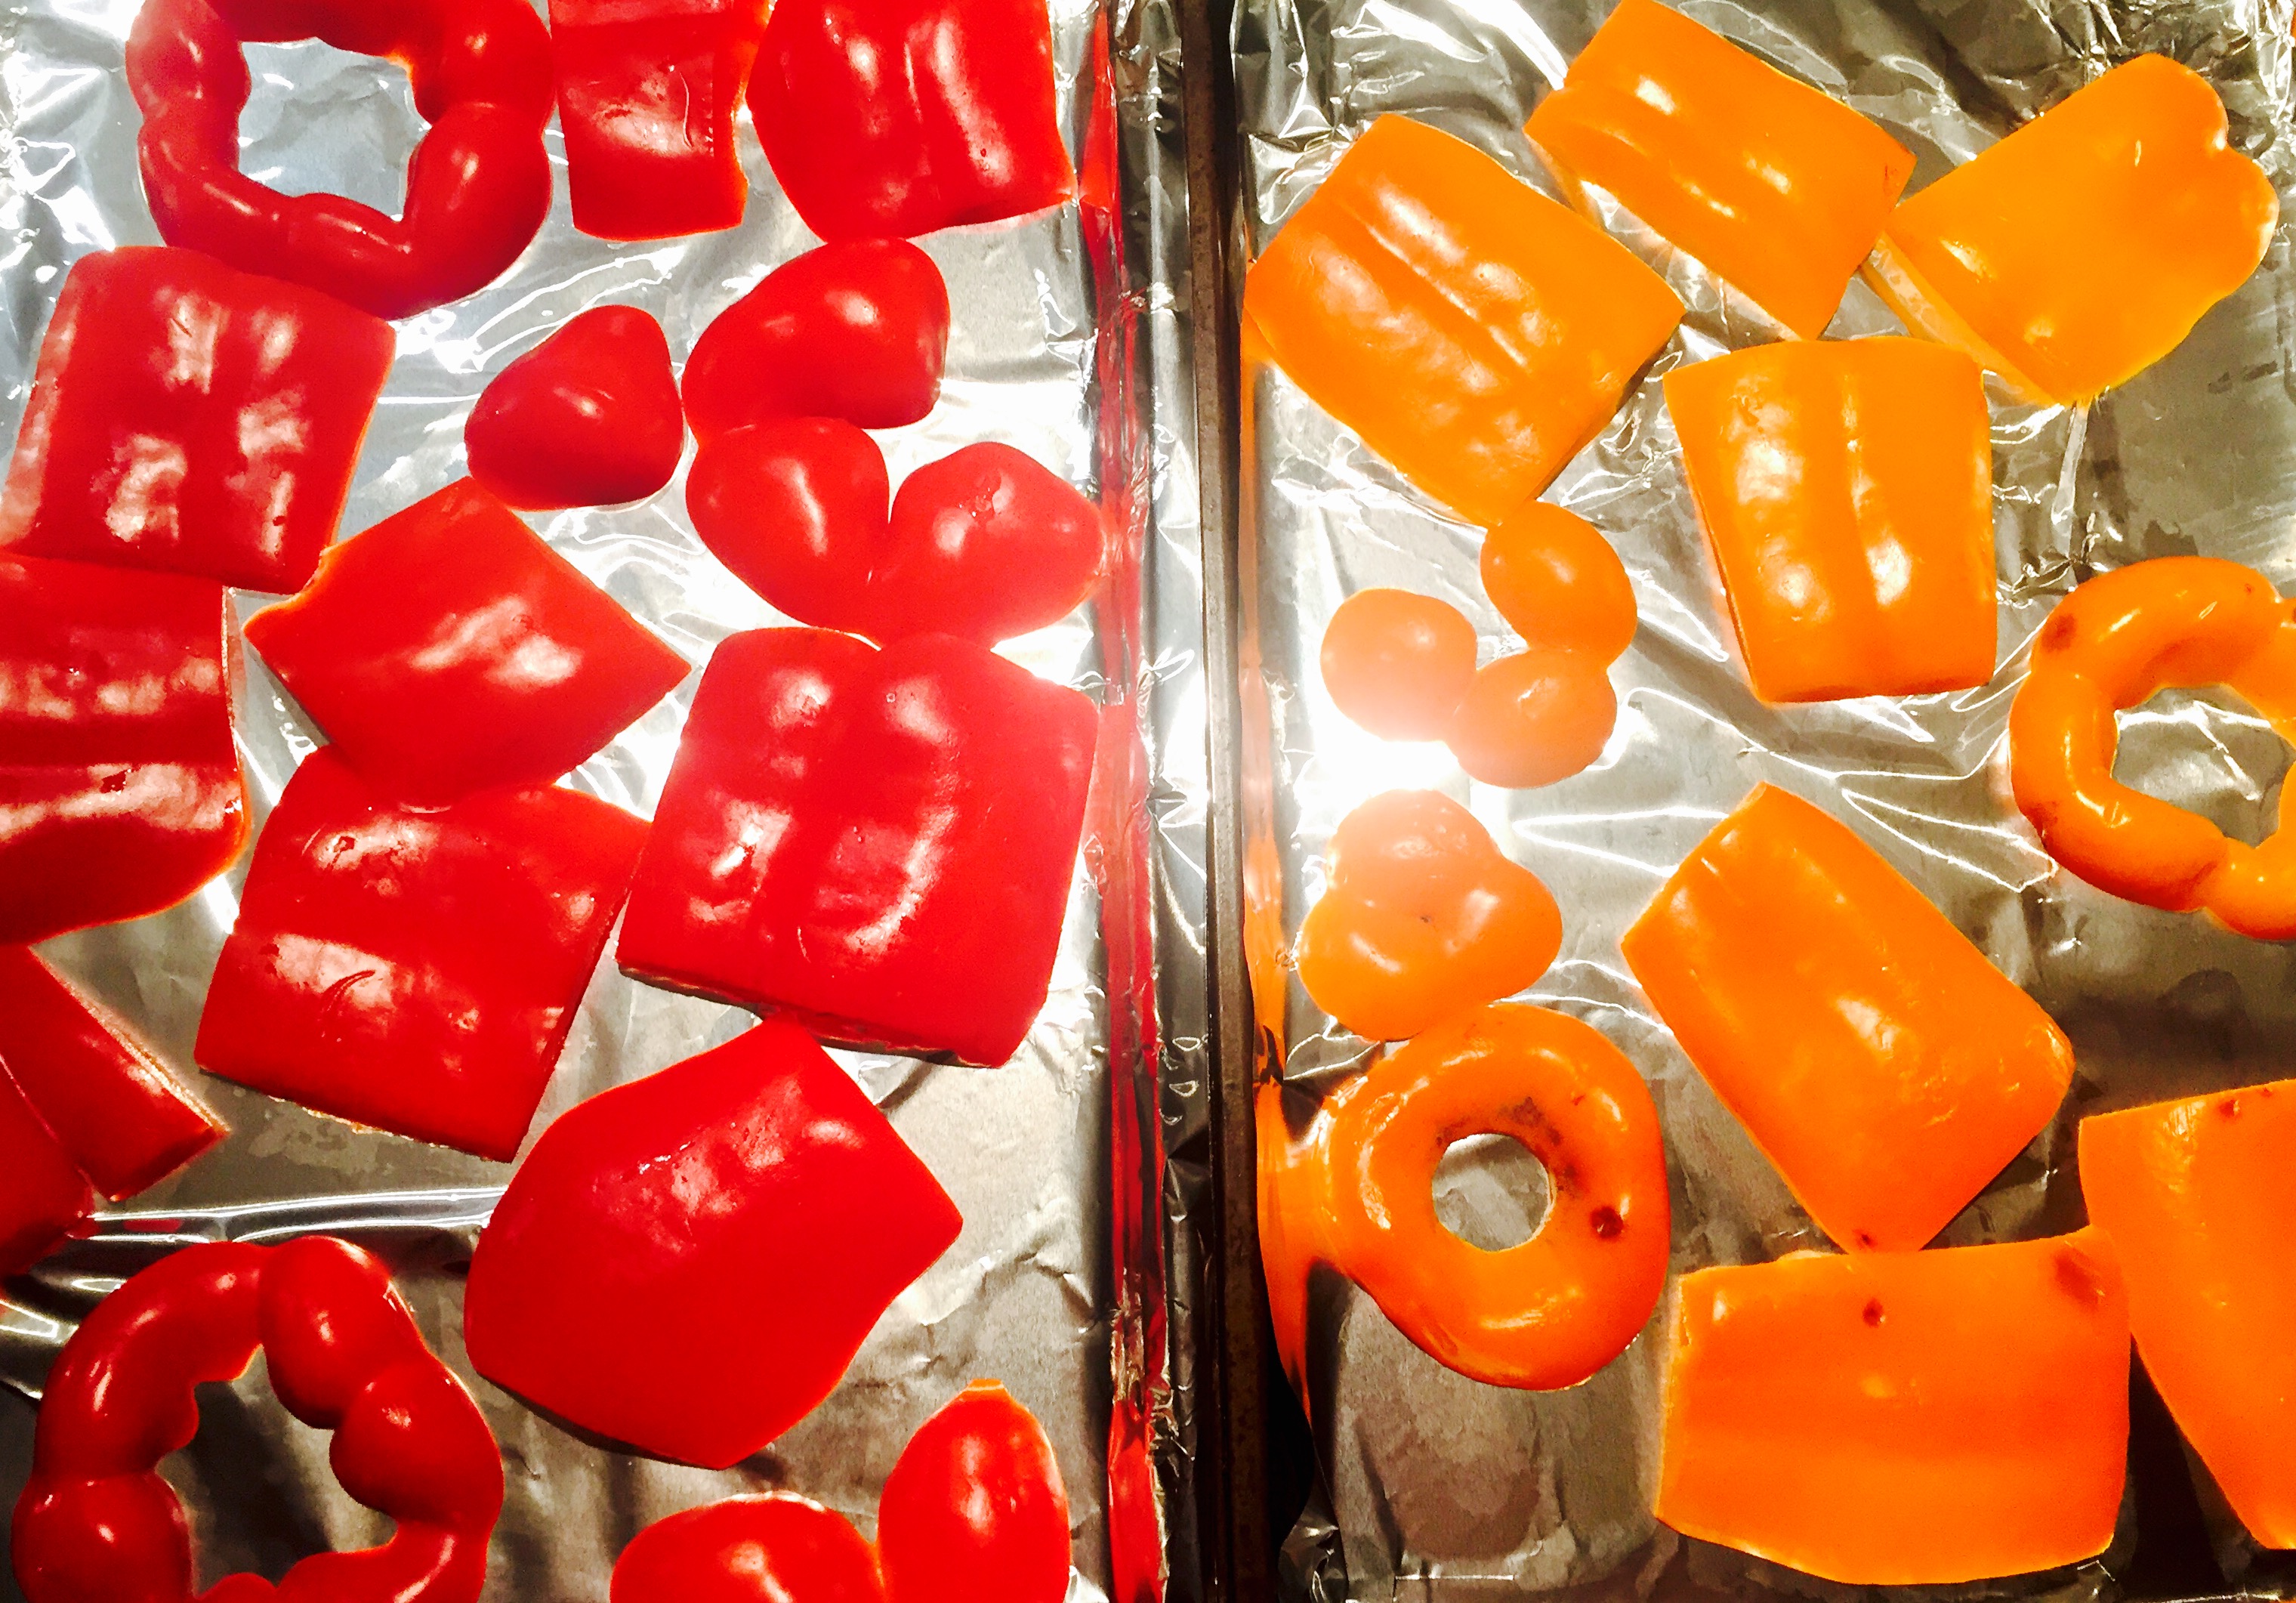 Sweet peppers, ready to become roasted peppers